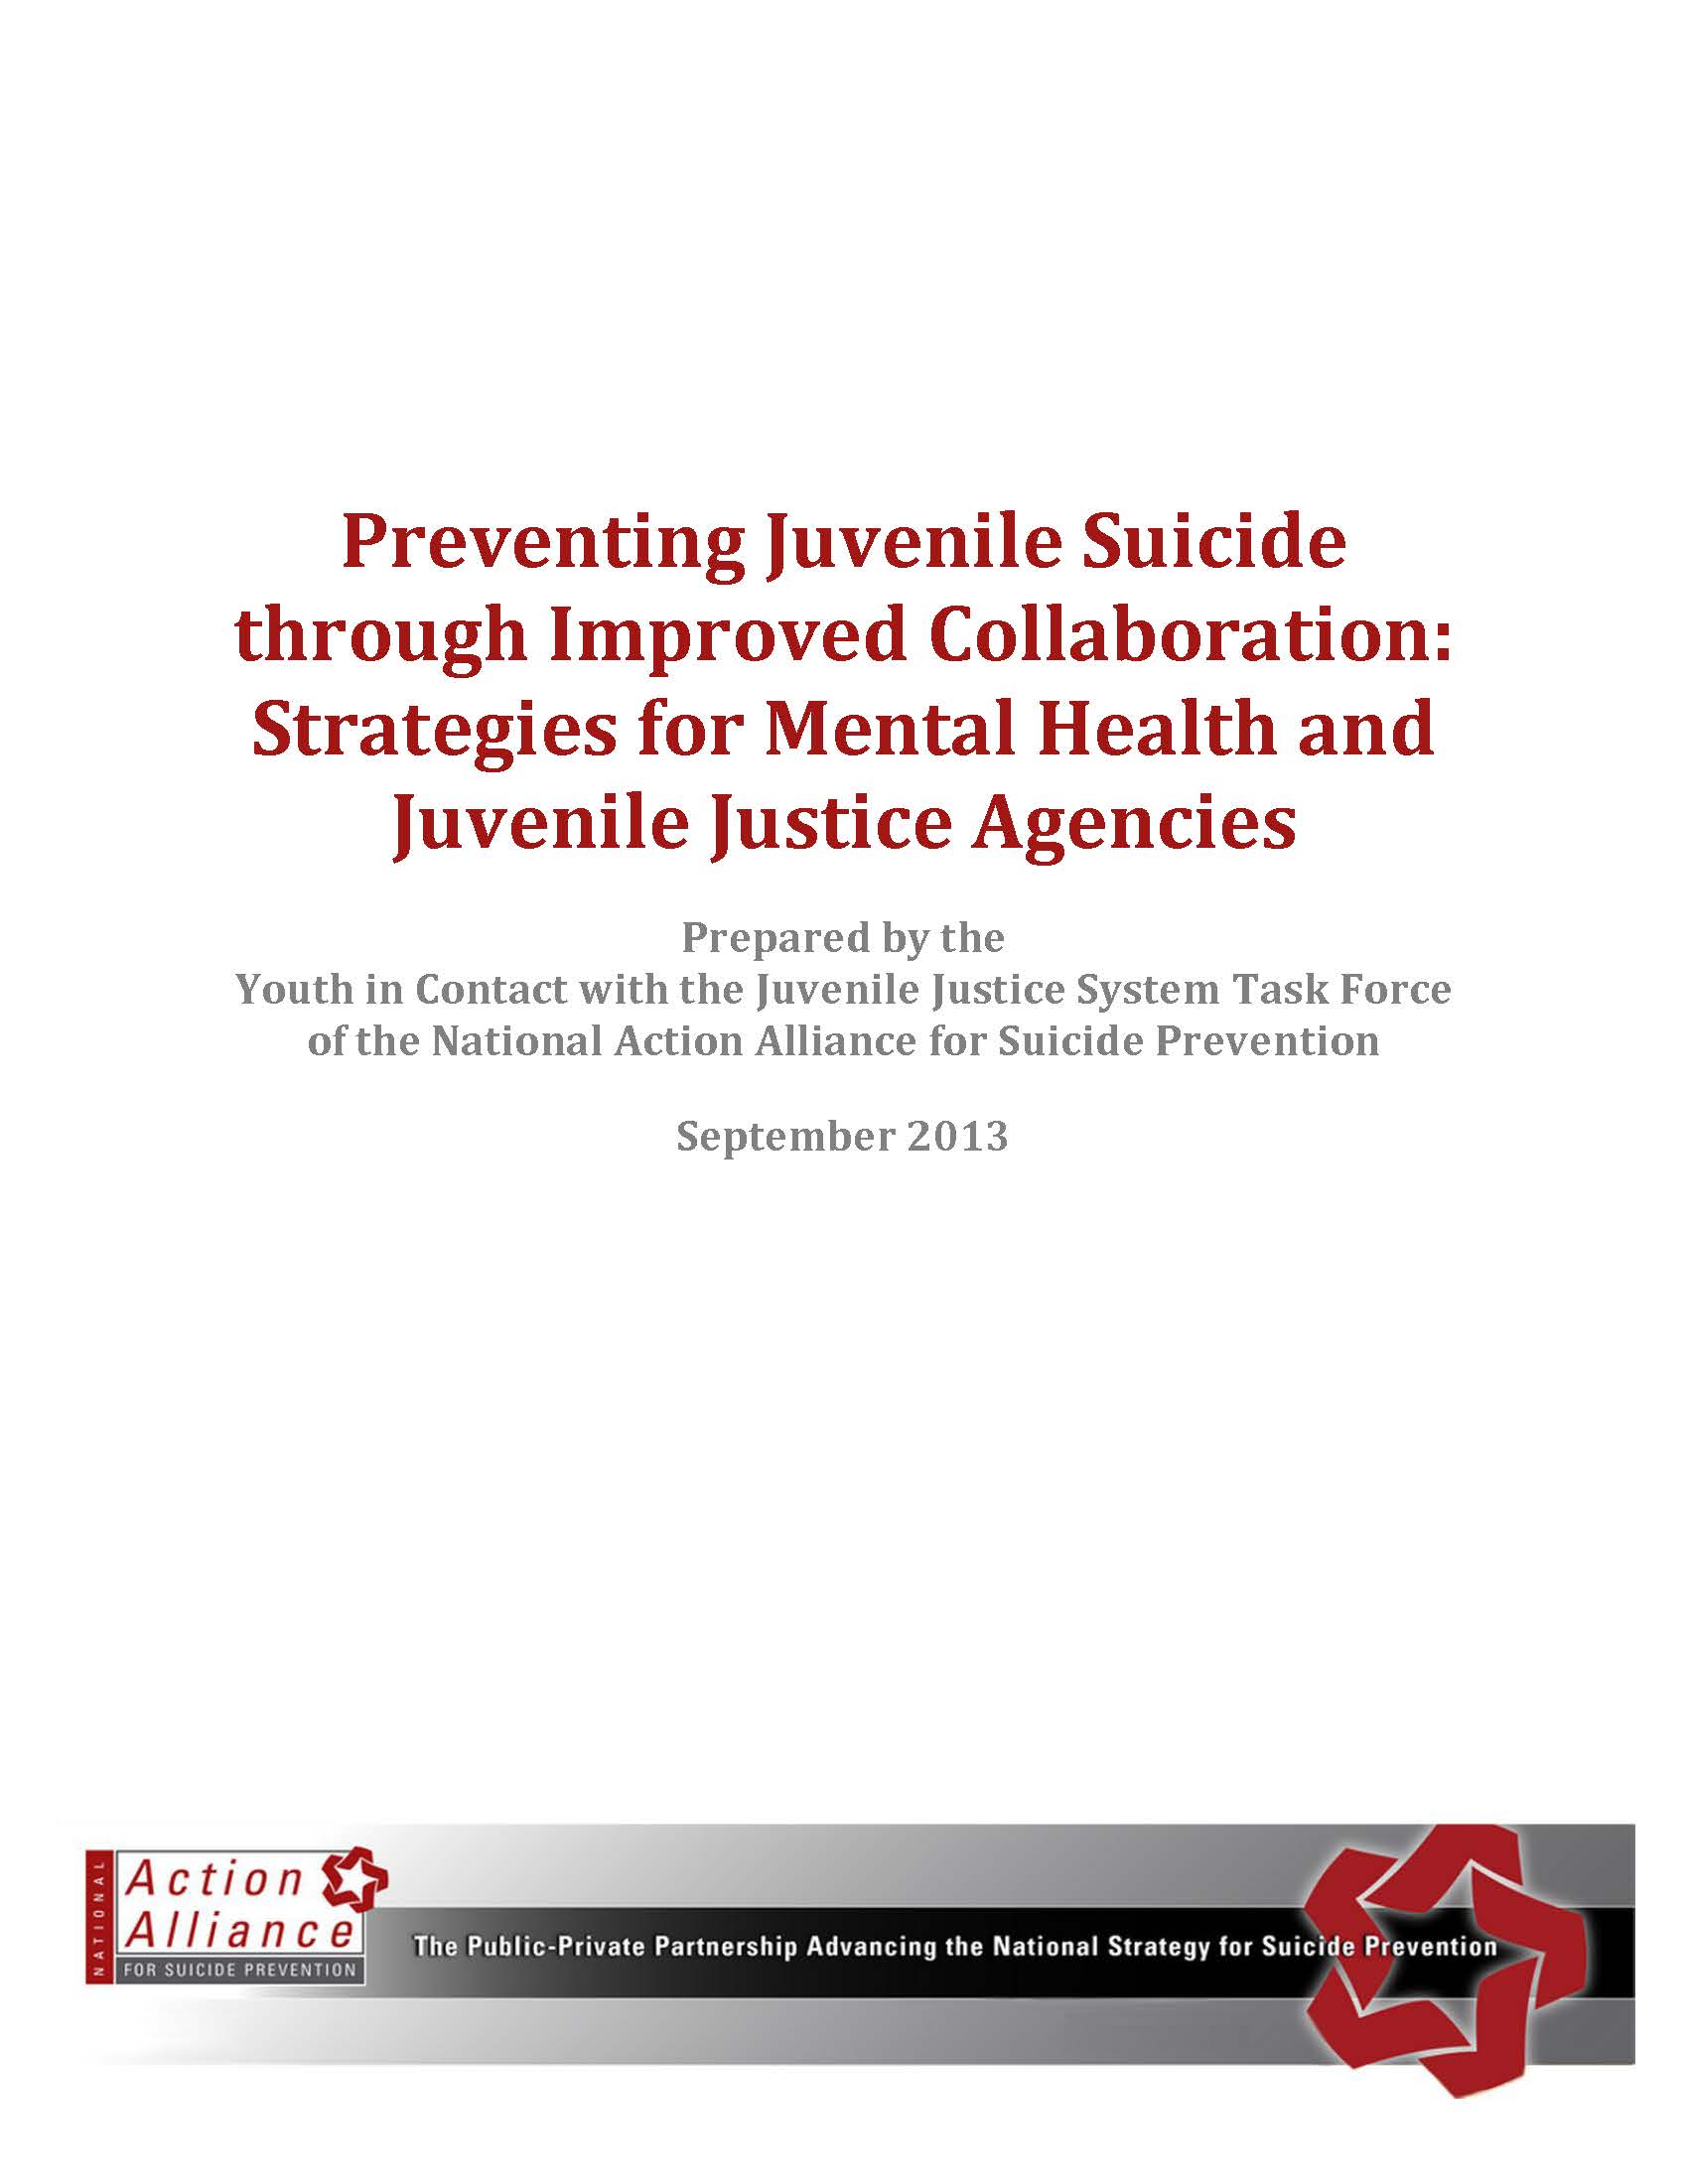 Preventing Juvenile Suicide through Improved Collaboration: Strategies for Mental Health and Juvenile Justice (Summary)